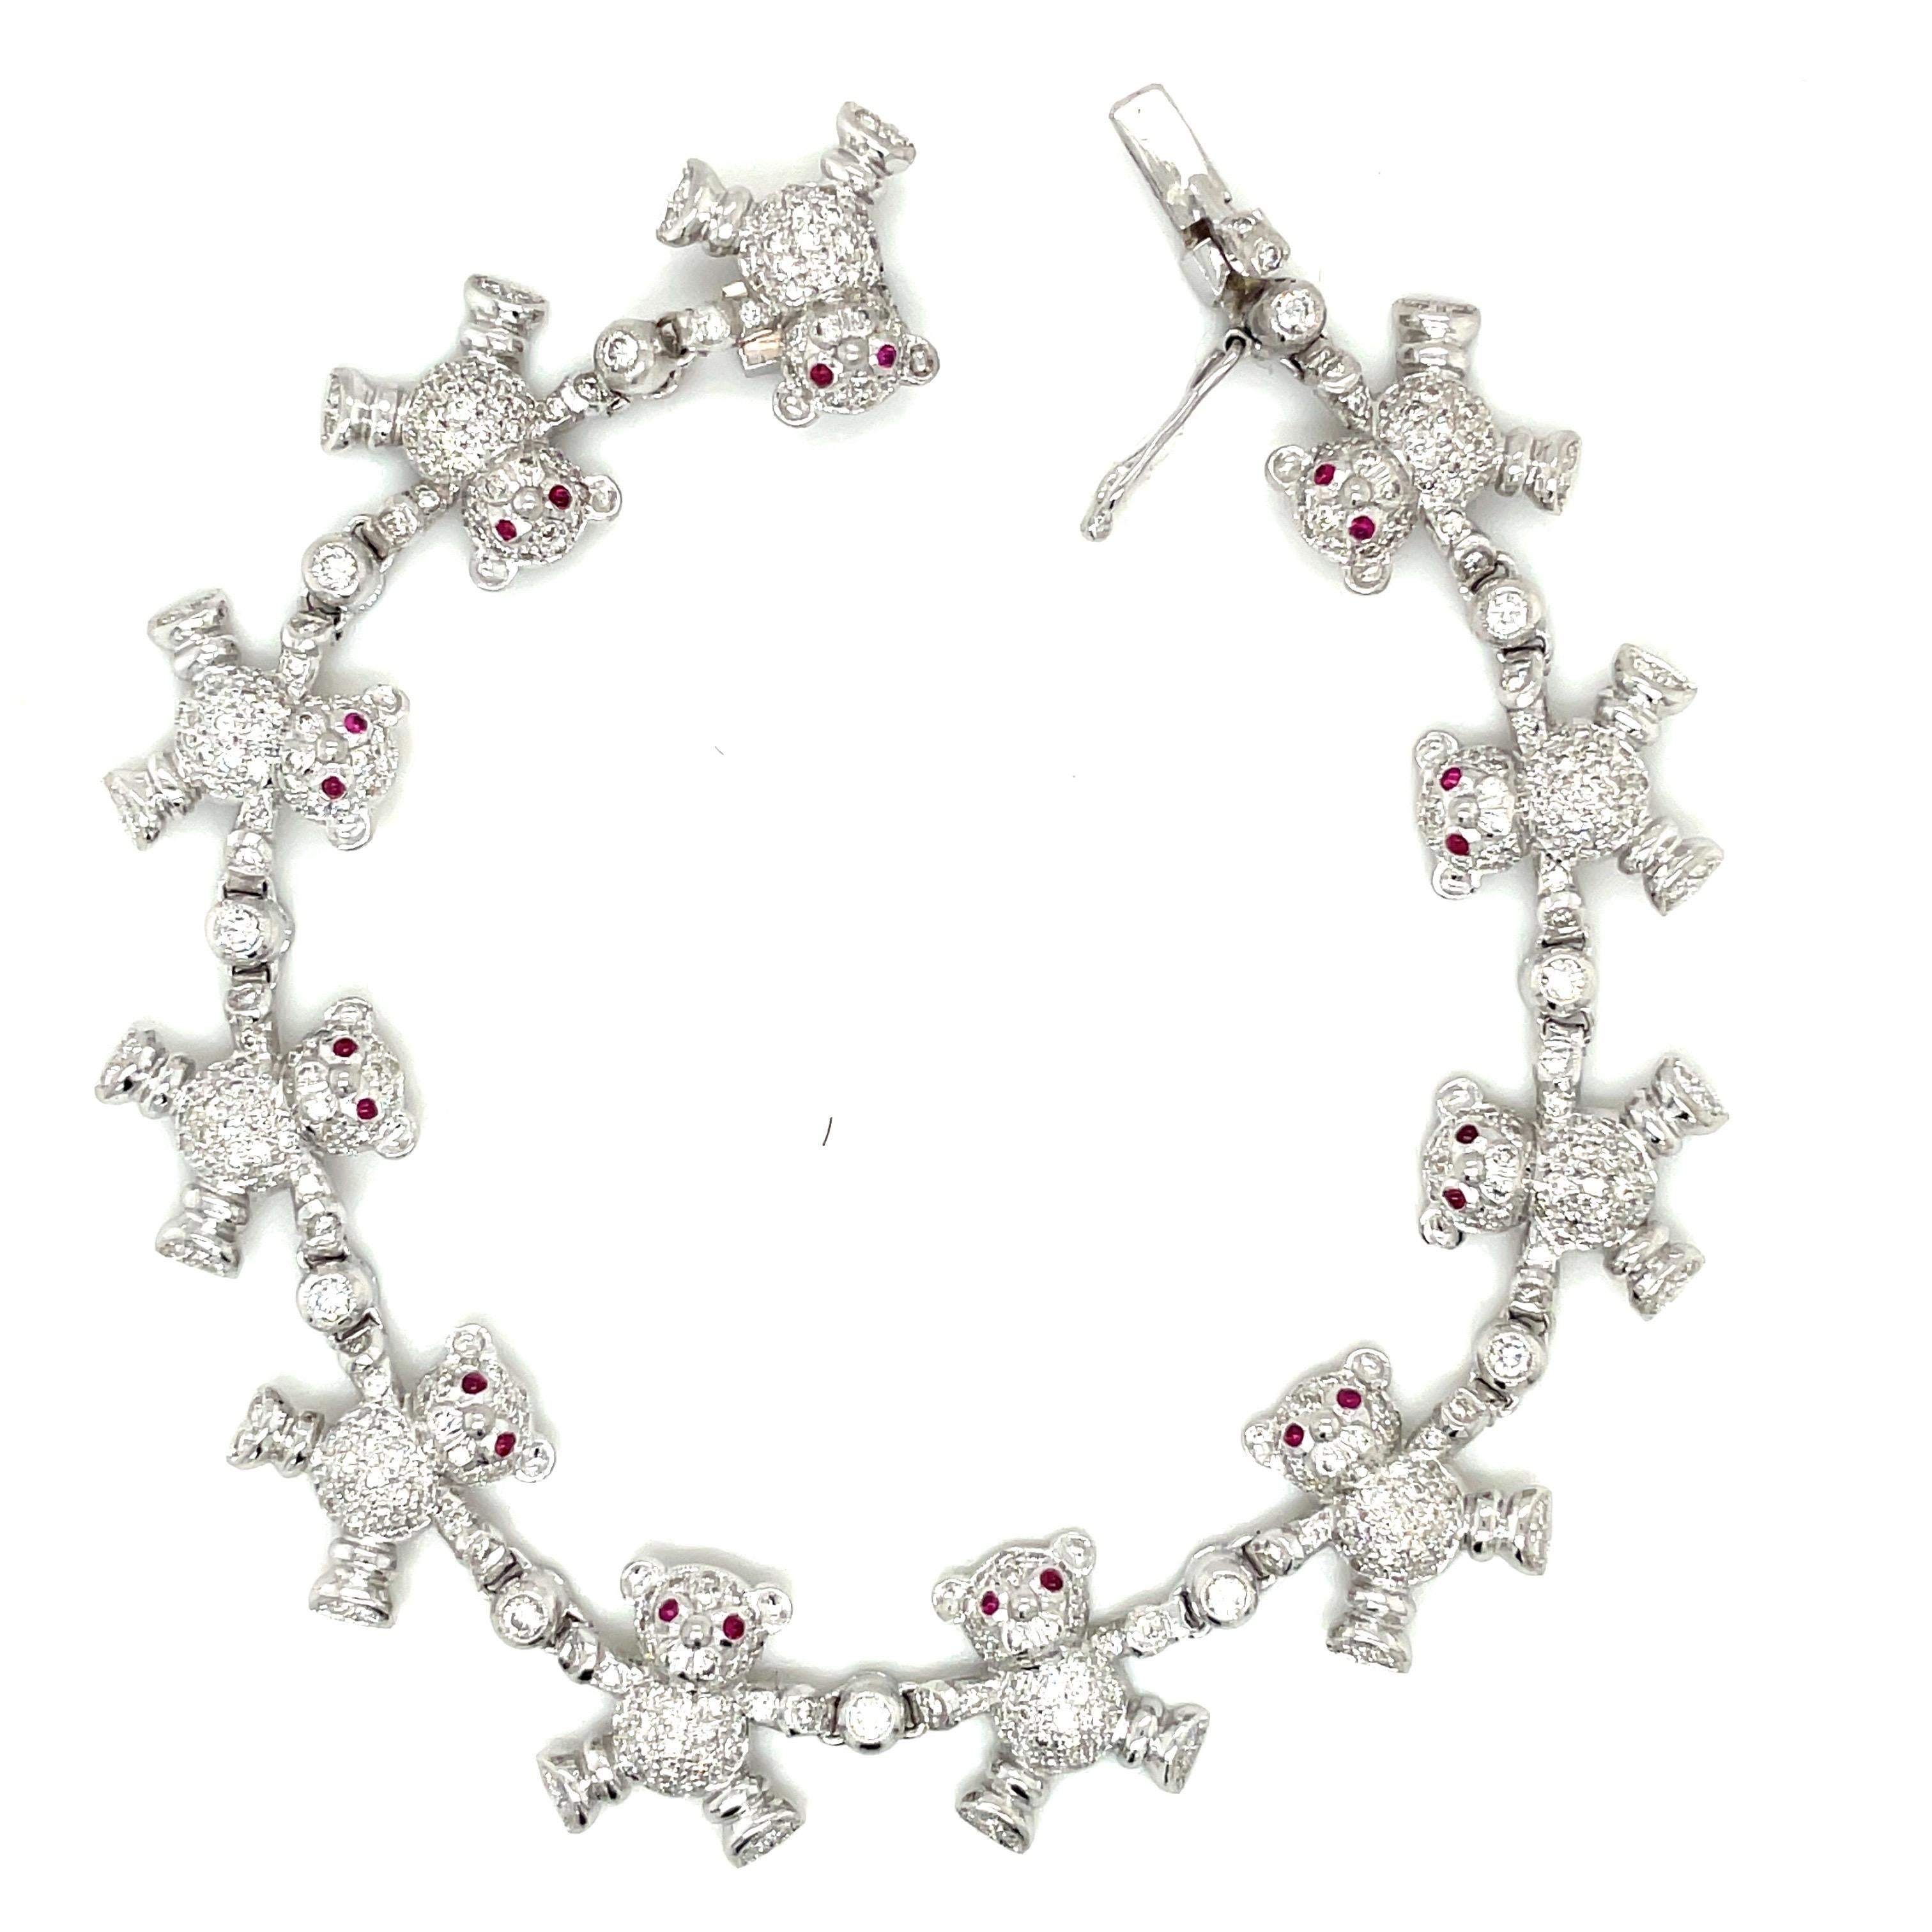 Cellini Jewelers NYC exclusive. A fun and easy to wear diamond bracelet. Designed with 11 pave diamond teddy bears with ruby eyes . Each teddy is joined by a bezel set round diamond. The 18 karat white gold bracelet  measures 7.5